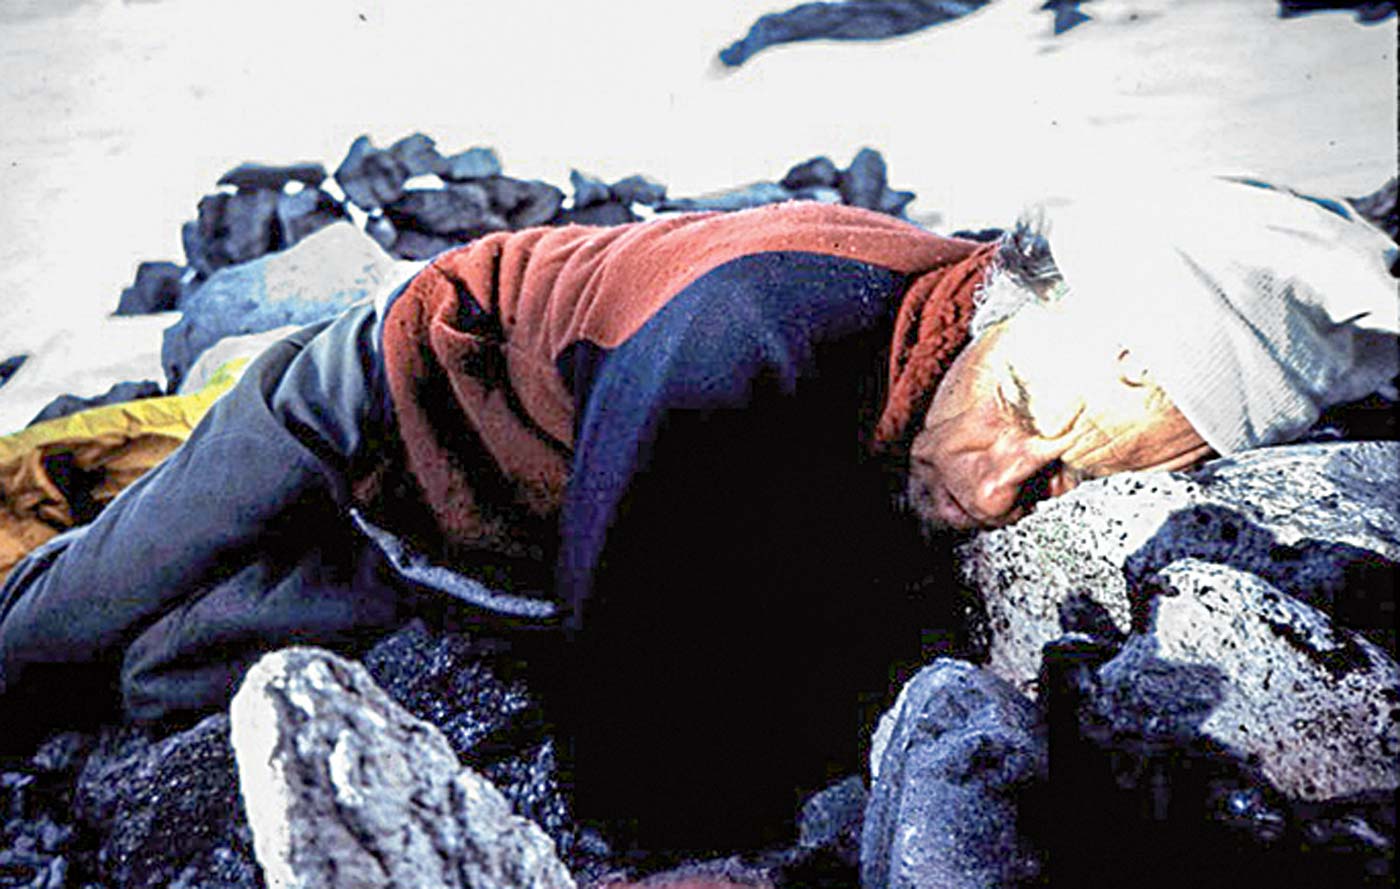 Beckey rests after the approach to Mt. Goode, with a rock for a pillow. [Photo] Douglas McCarty